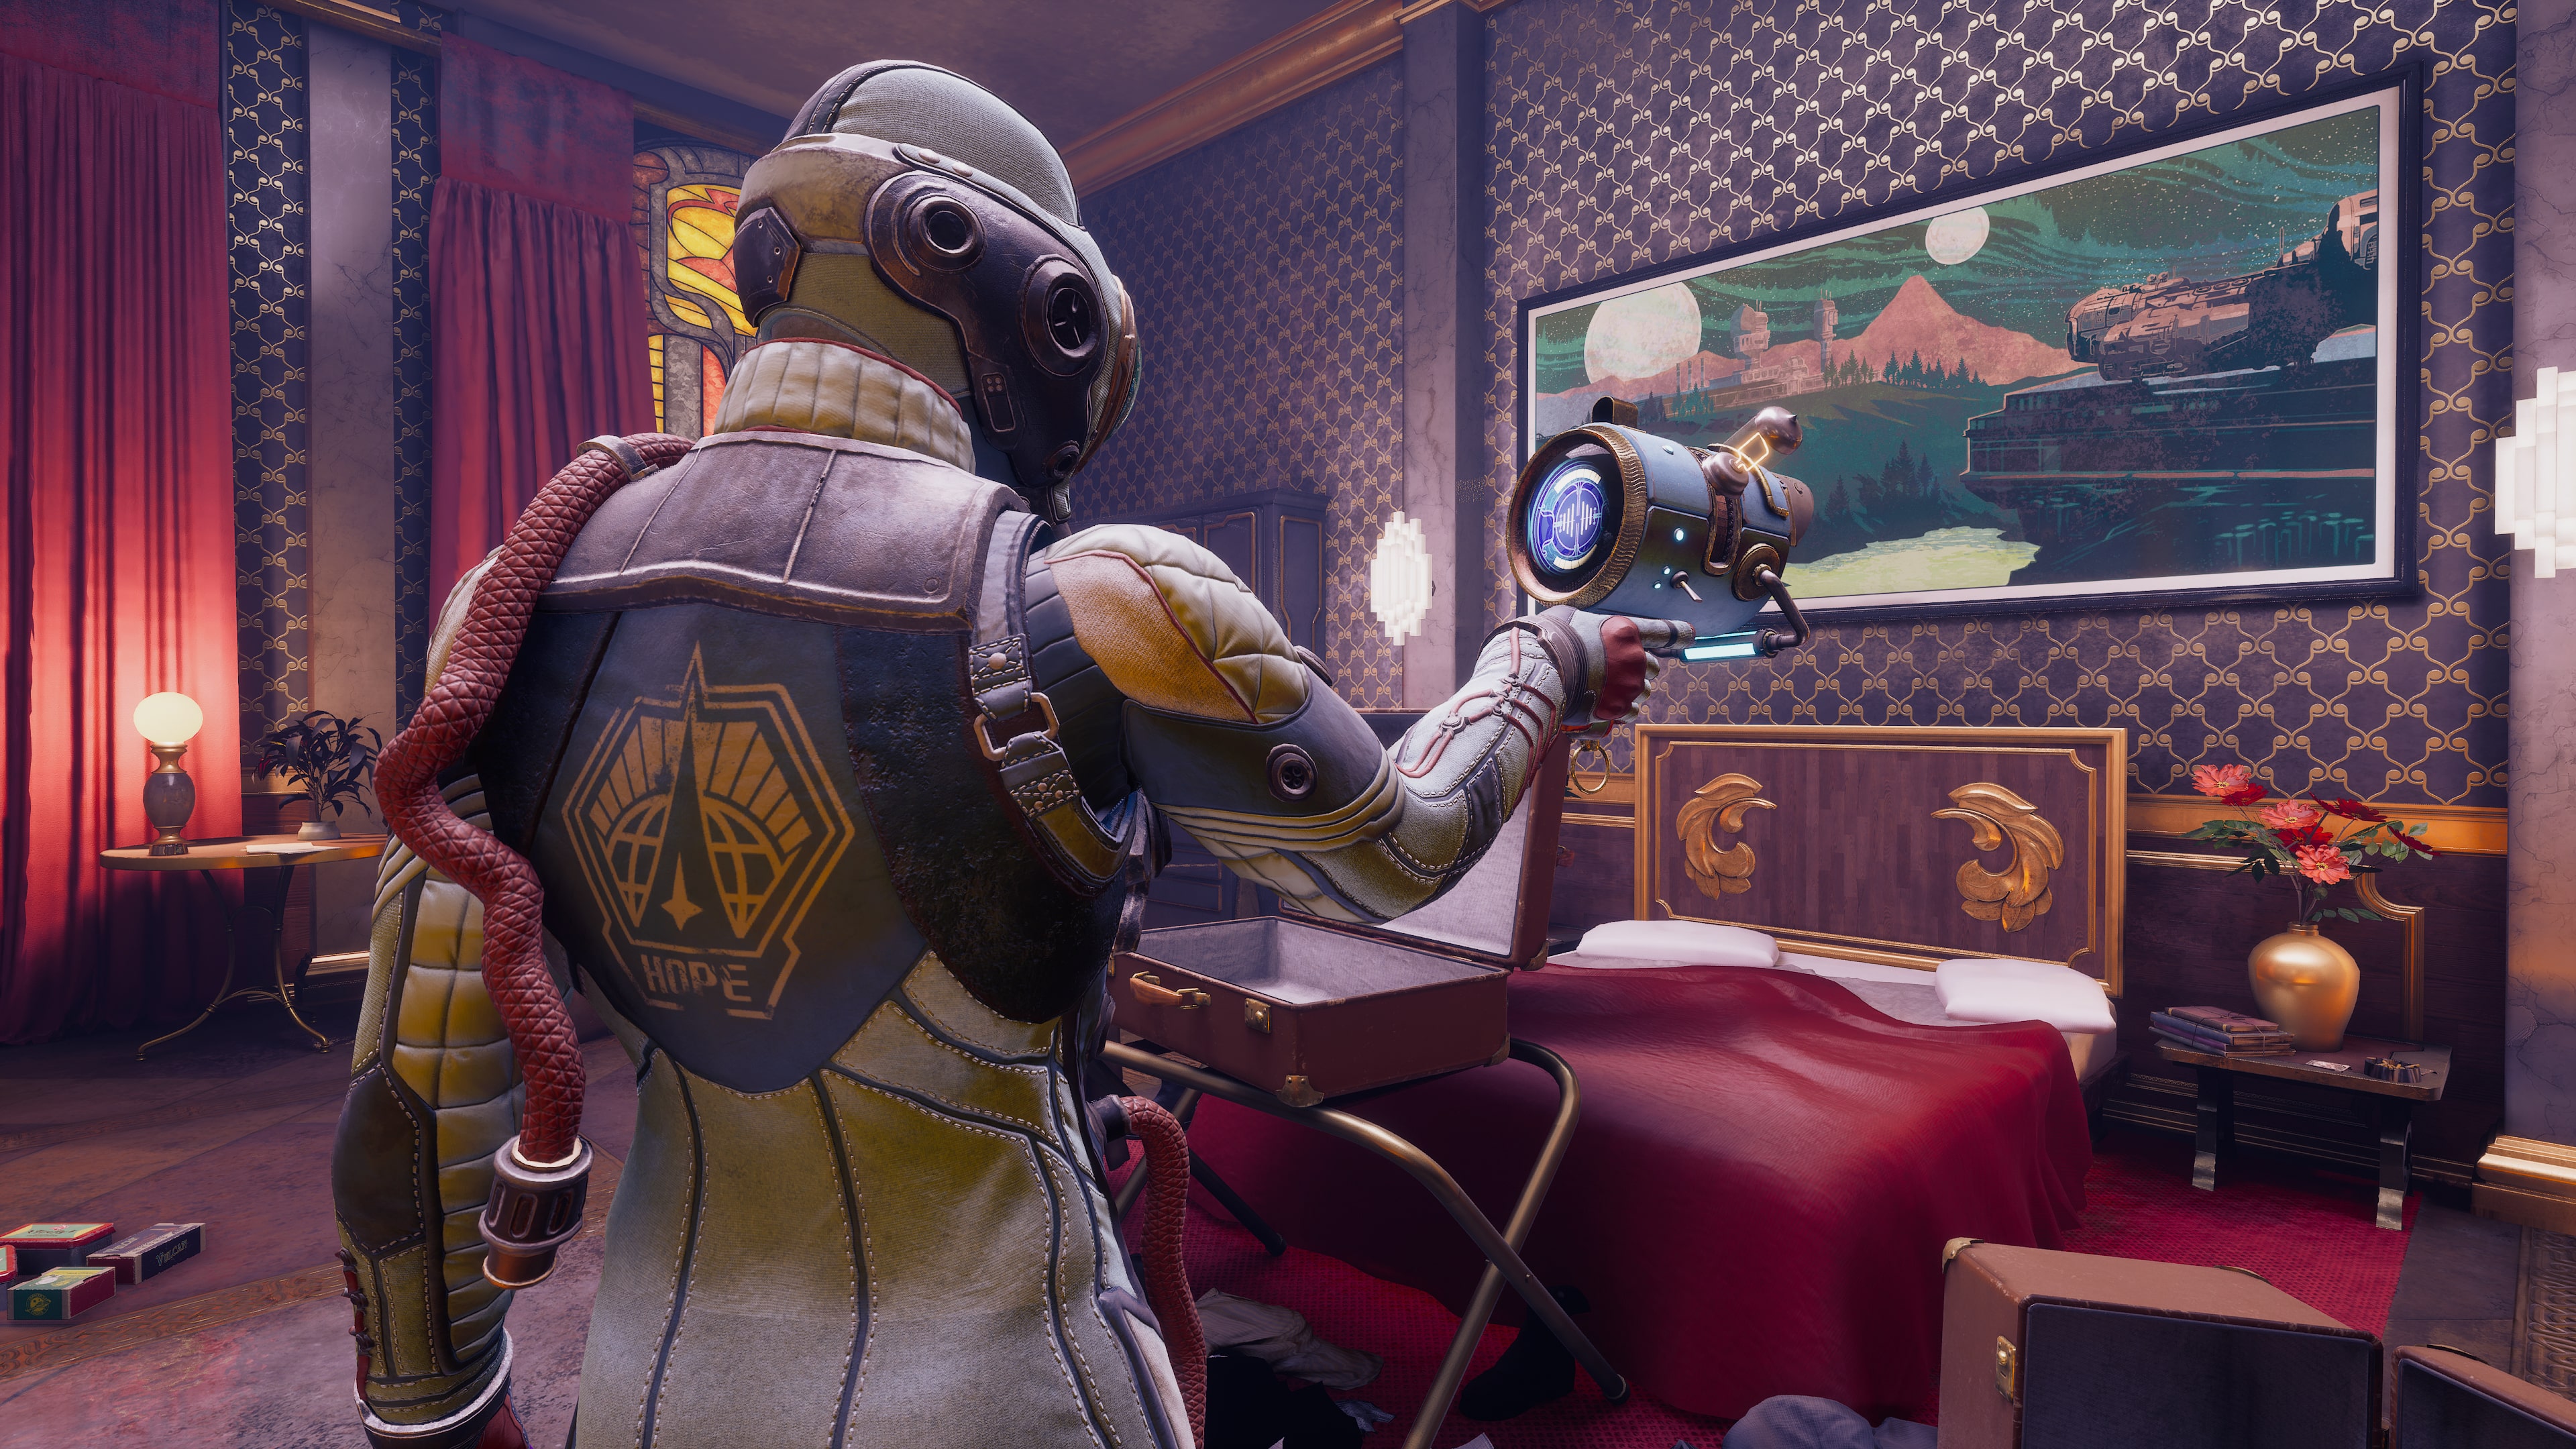 Buy The Outer Worlds PS5 Compare Prices